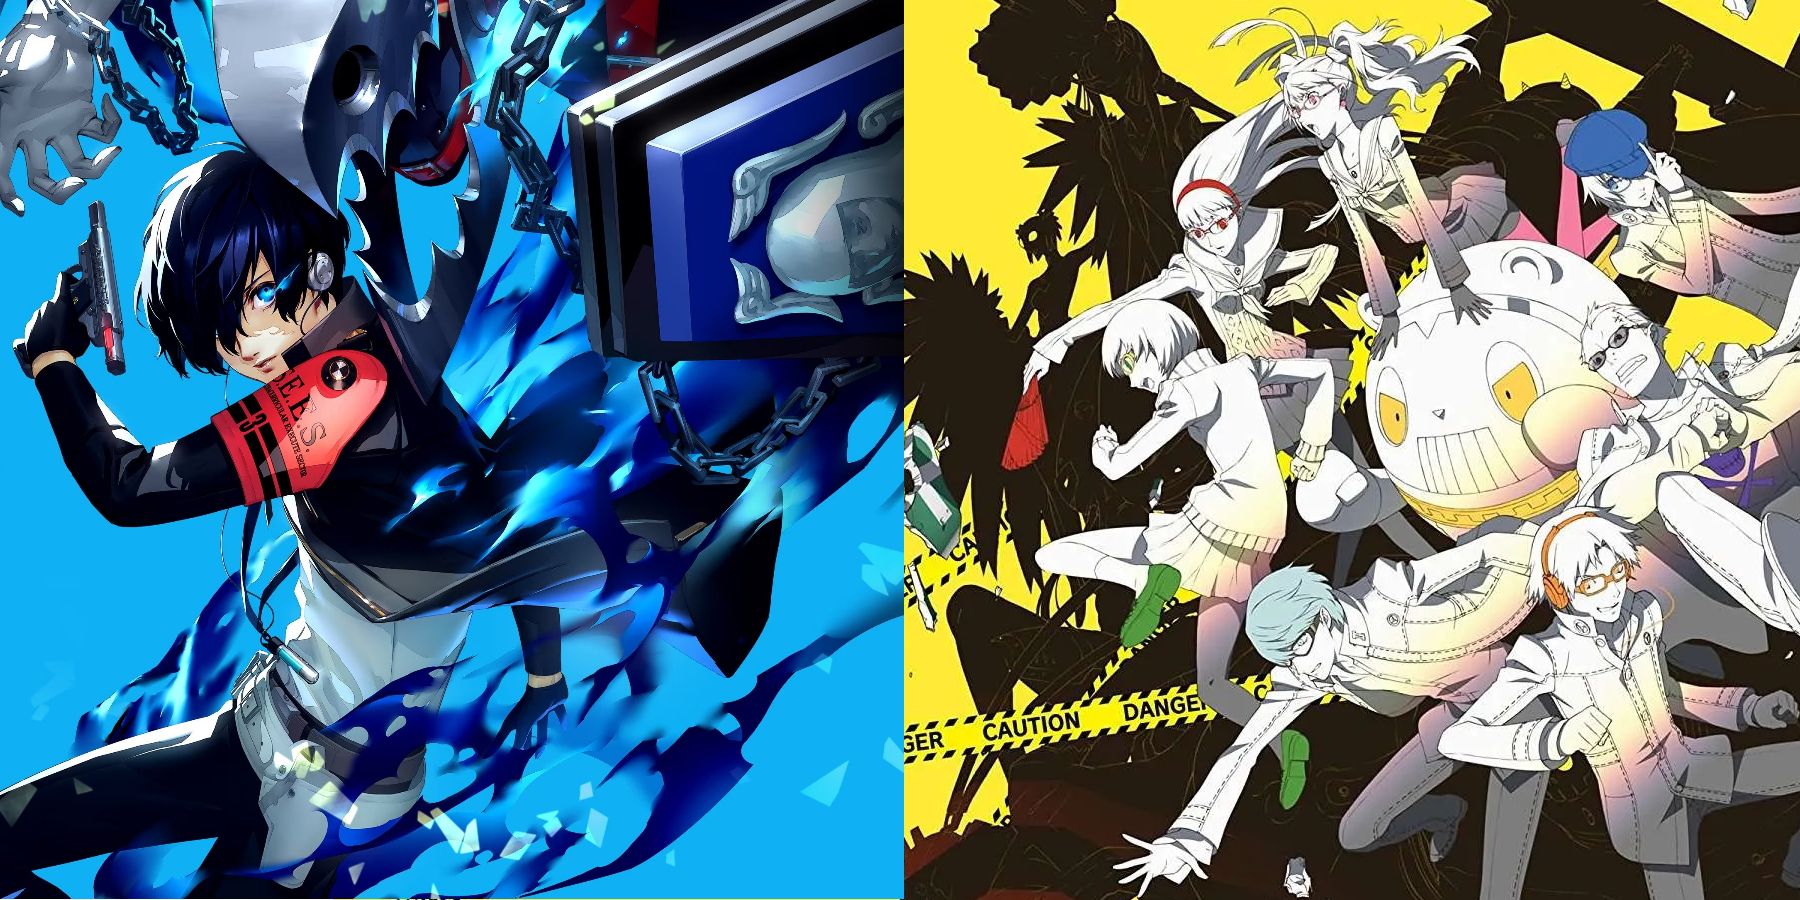 Persona 3 Reload' is shaping up to be a must-play remake